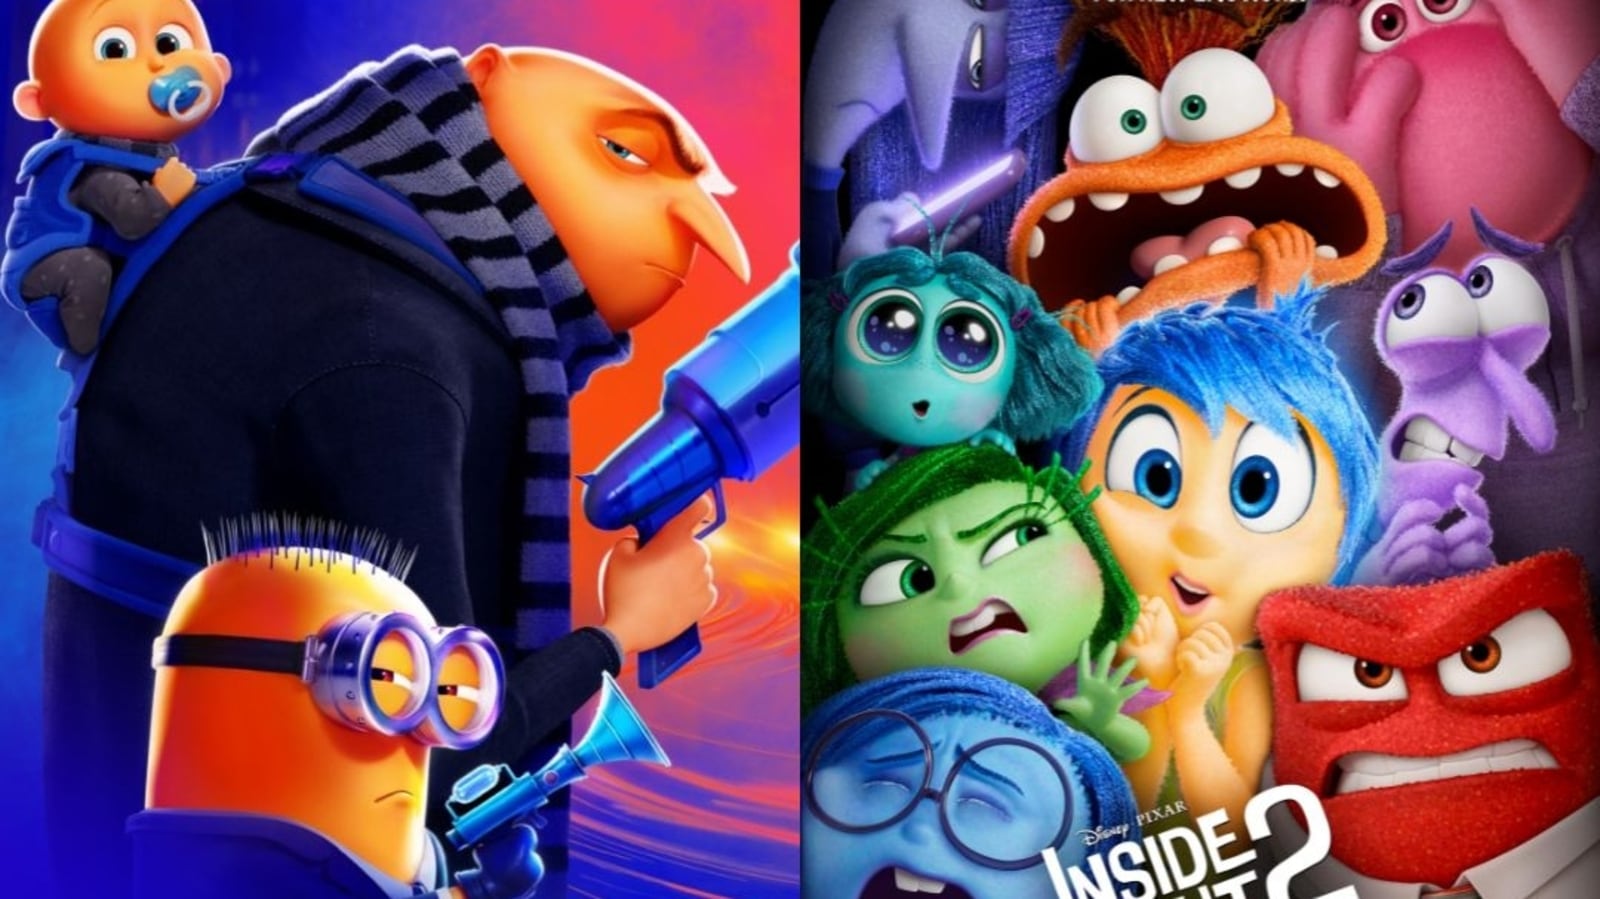 4th of July box office: Animated family flicks Despicable Me 4 and Inside Out set off fireworks during long weekend | Hollywood